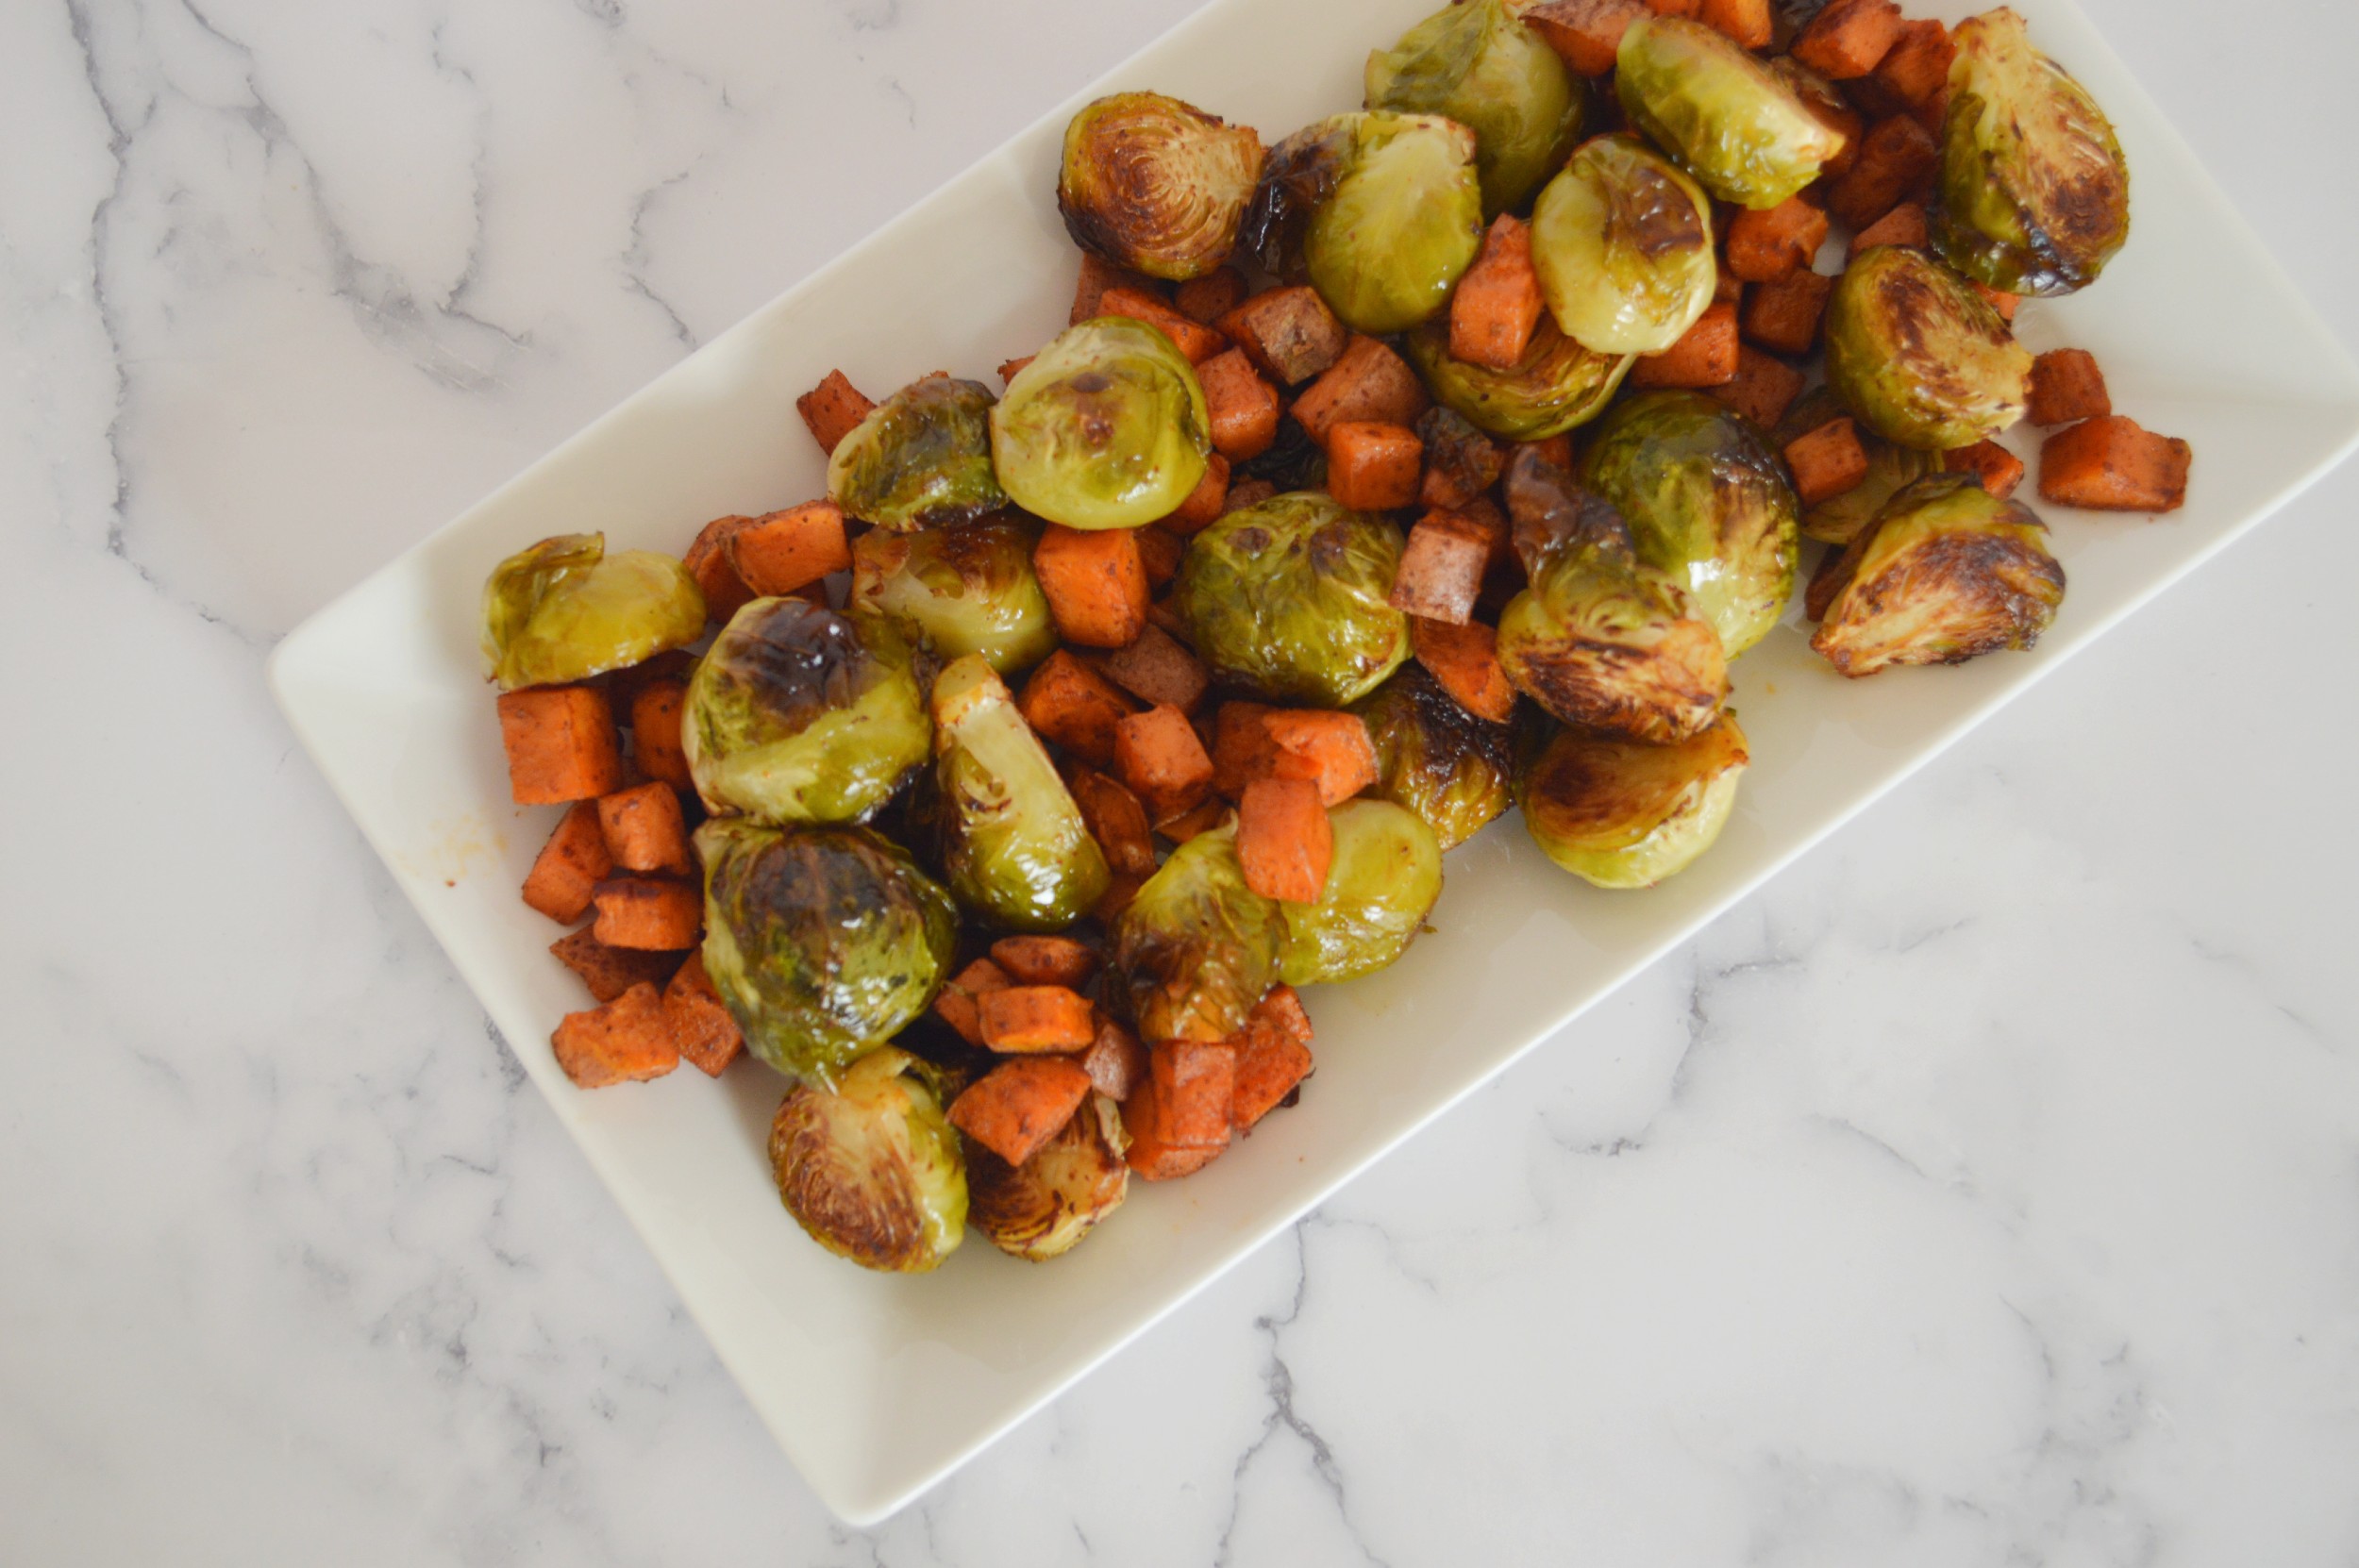 Brussel Sprout side dish